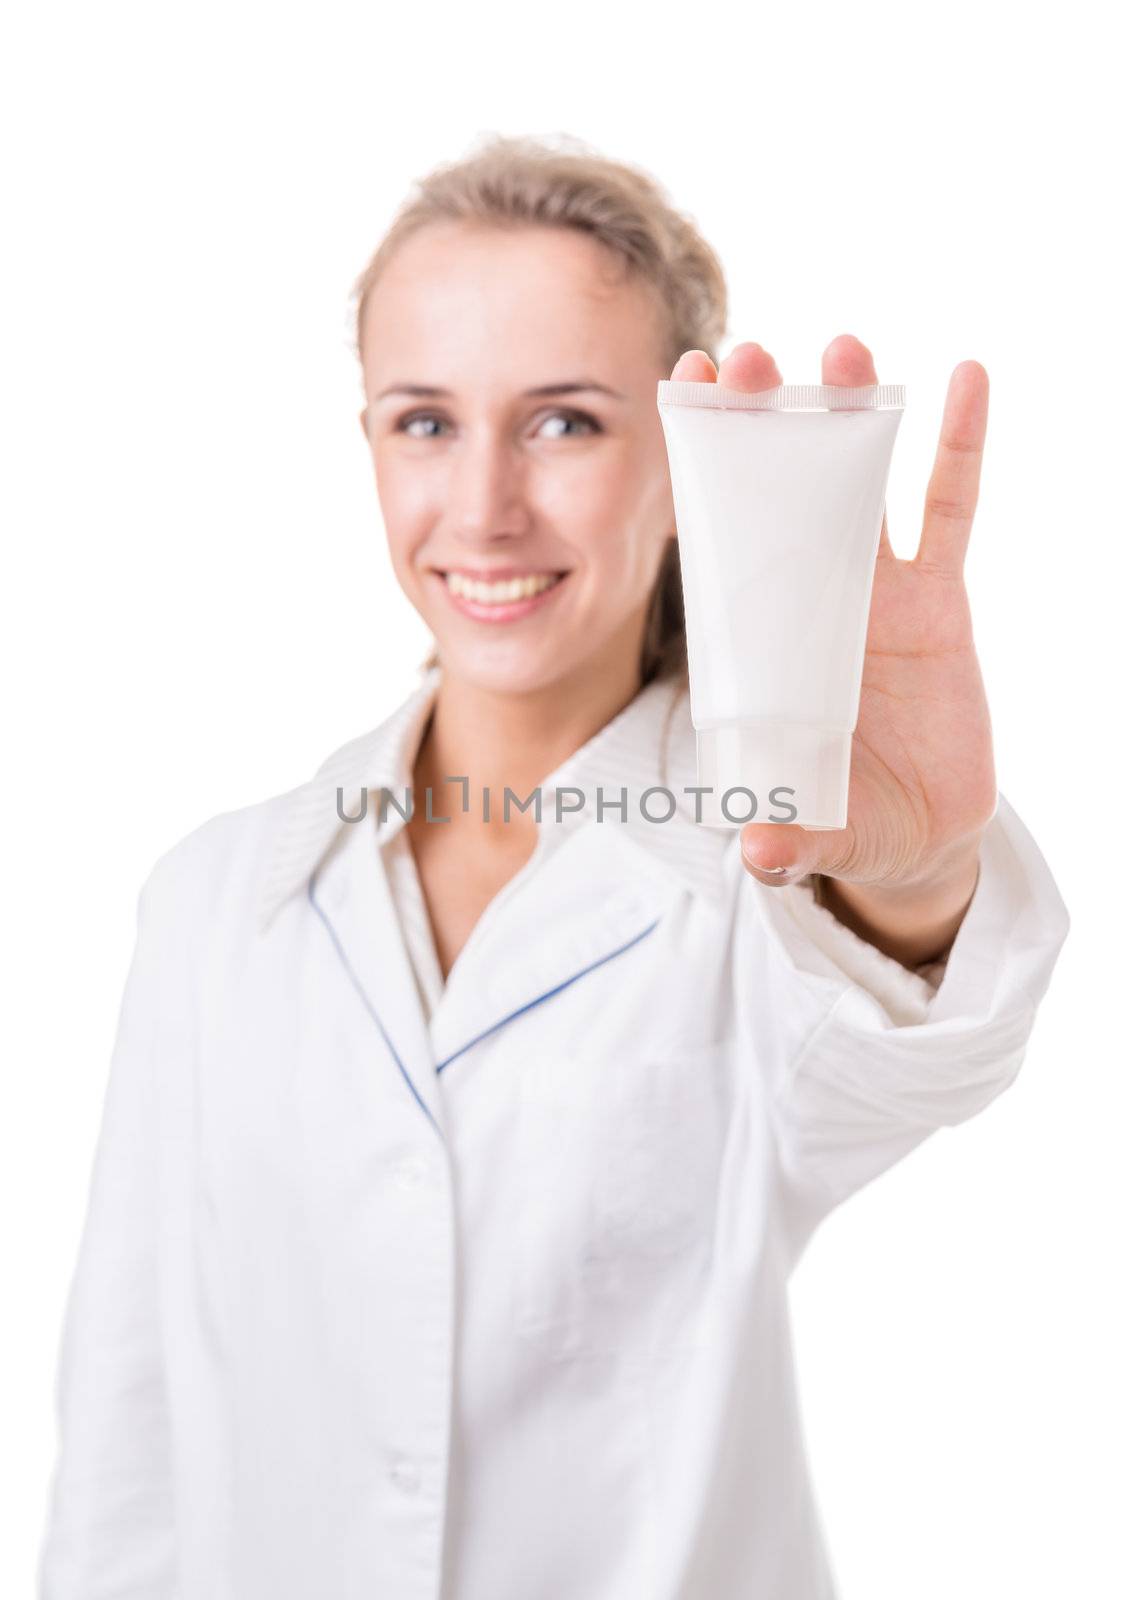 portrait of a woman - health worker. Isolation on white background with clipping path